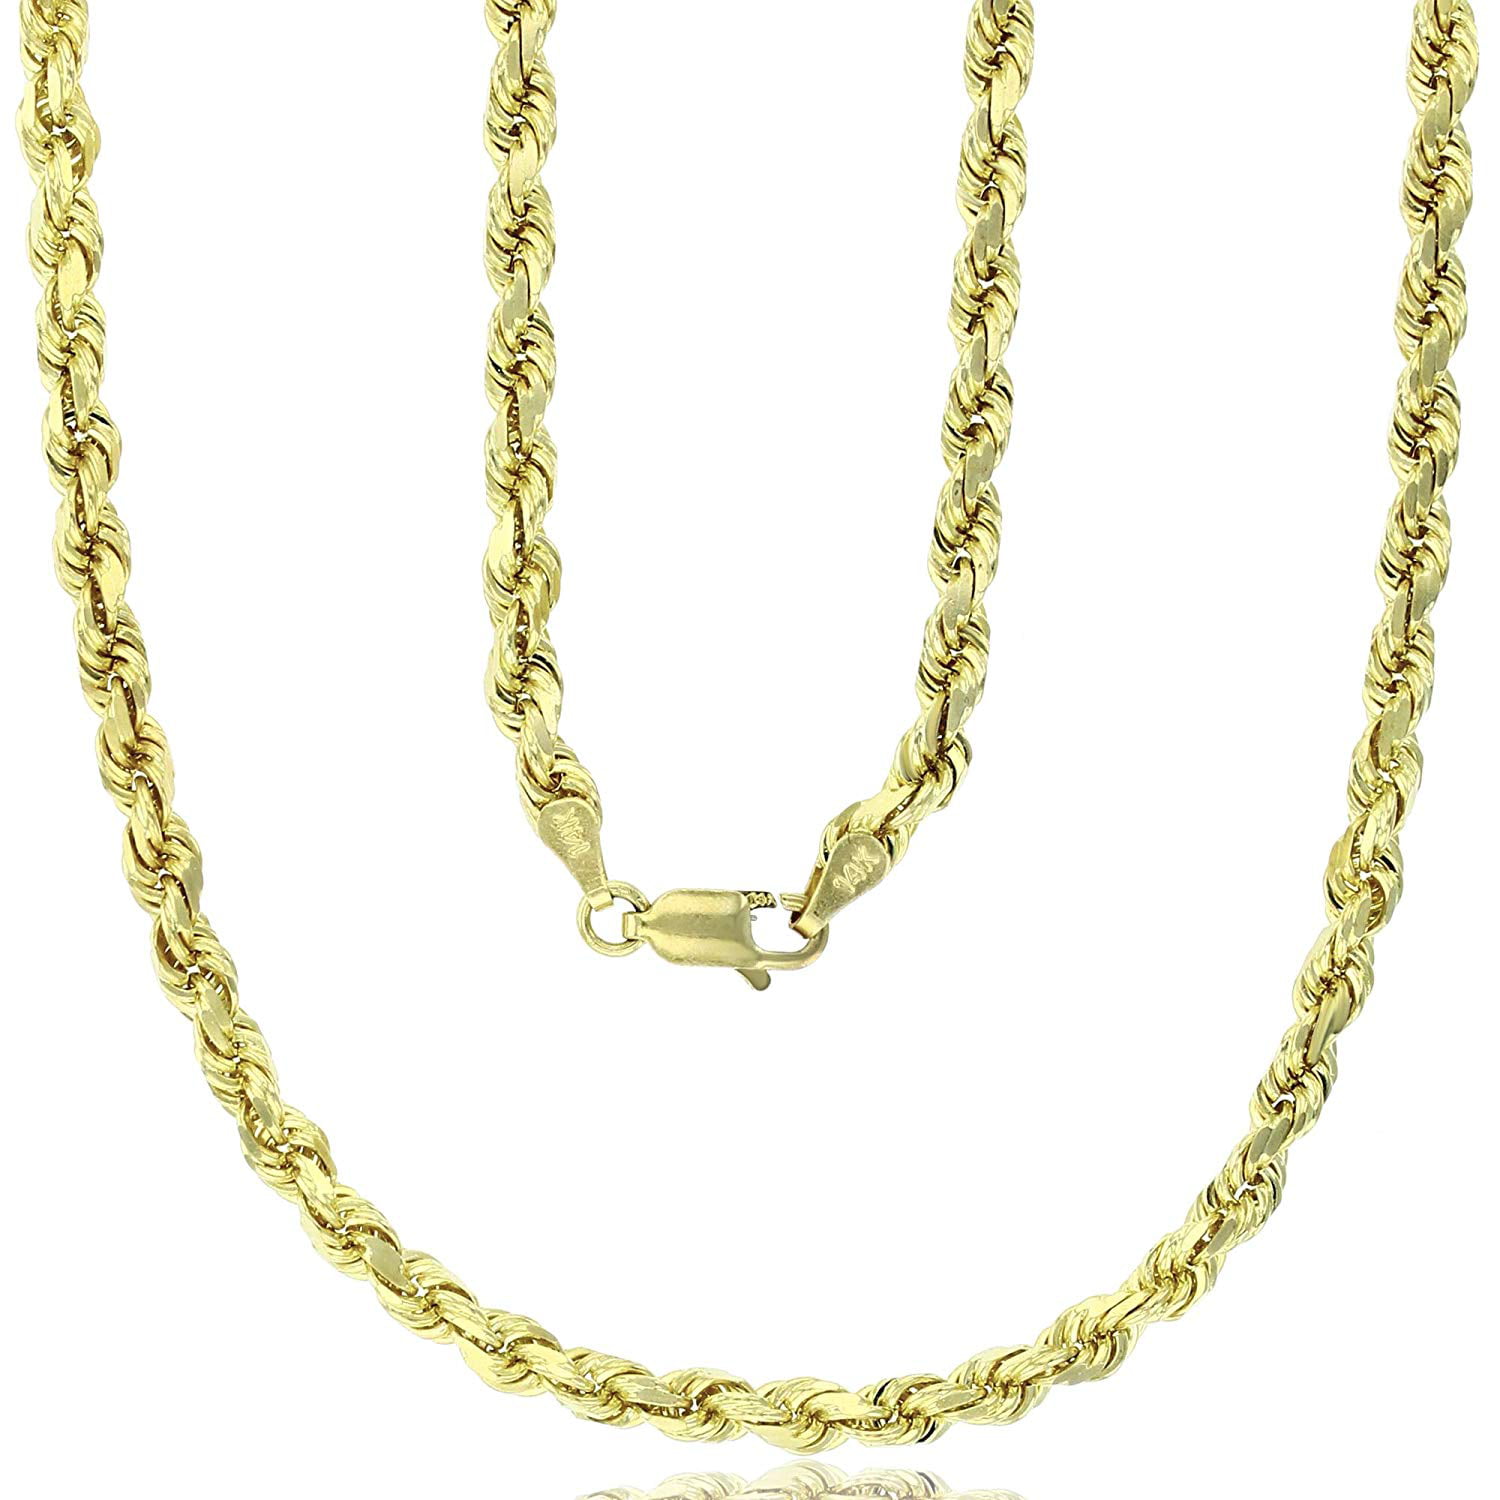 14k REAL White Gold Solid 1mm Diamond Cut Rope Chain Necklace with Lobster Claw Clasp